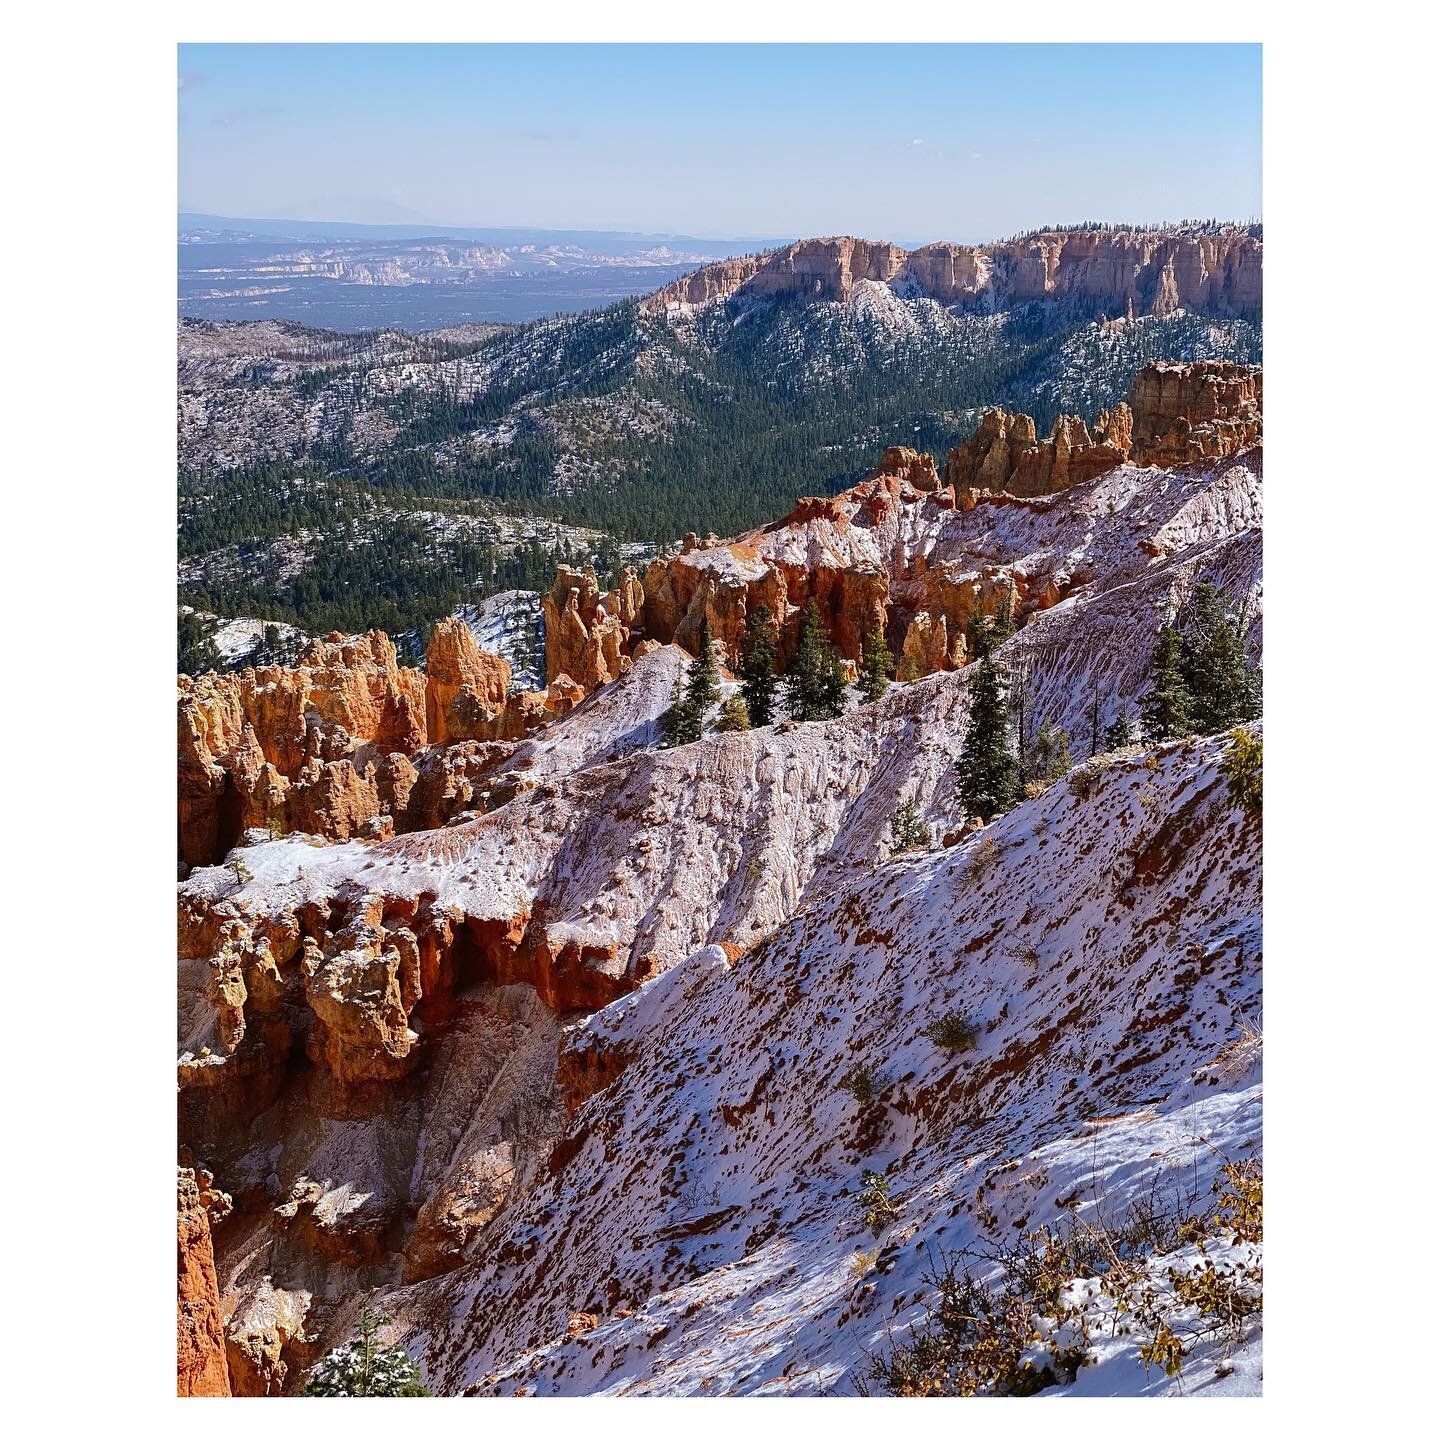 I&rsquo;m already a week into Christmas music at this point and am not even sorry about it! 🎄🎄🎄 It was snowing when the sister and I arrived at Bryce Canyon National Park last weekend, and it only felt right to listen to Harry Connick, Jr&rsquo;s 